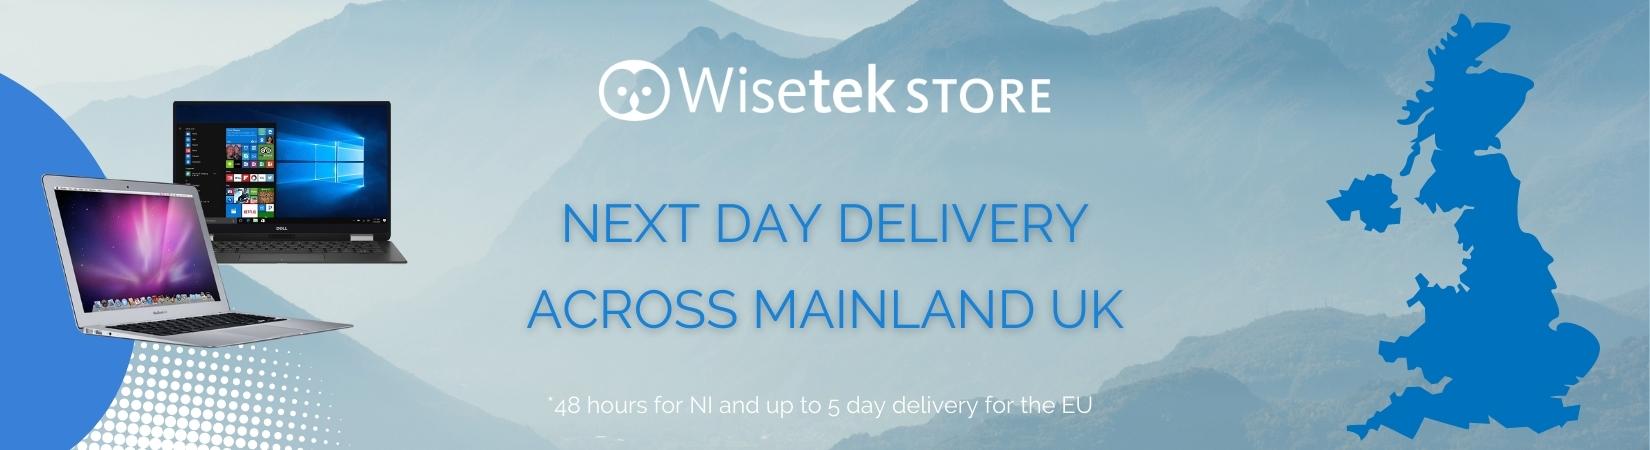 Refurbished Device Specialist Seller Wisetek Store Launches Across the UK